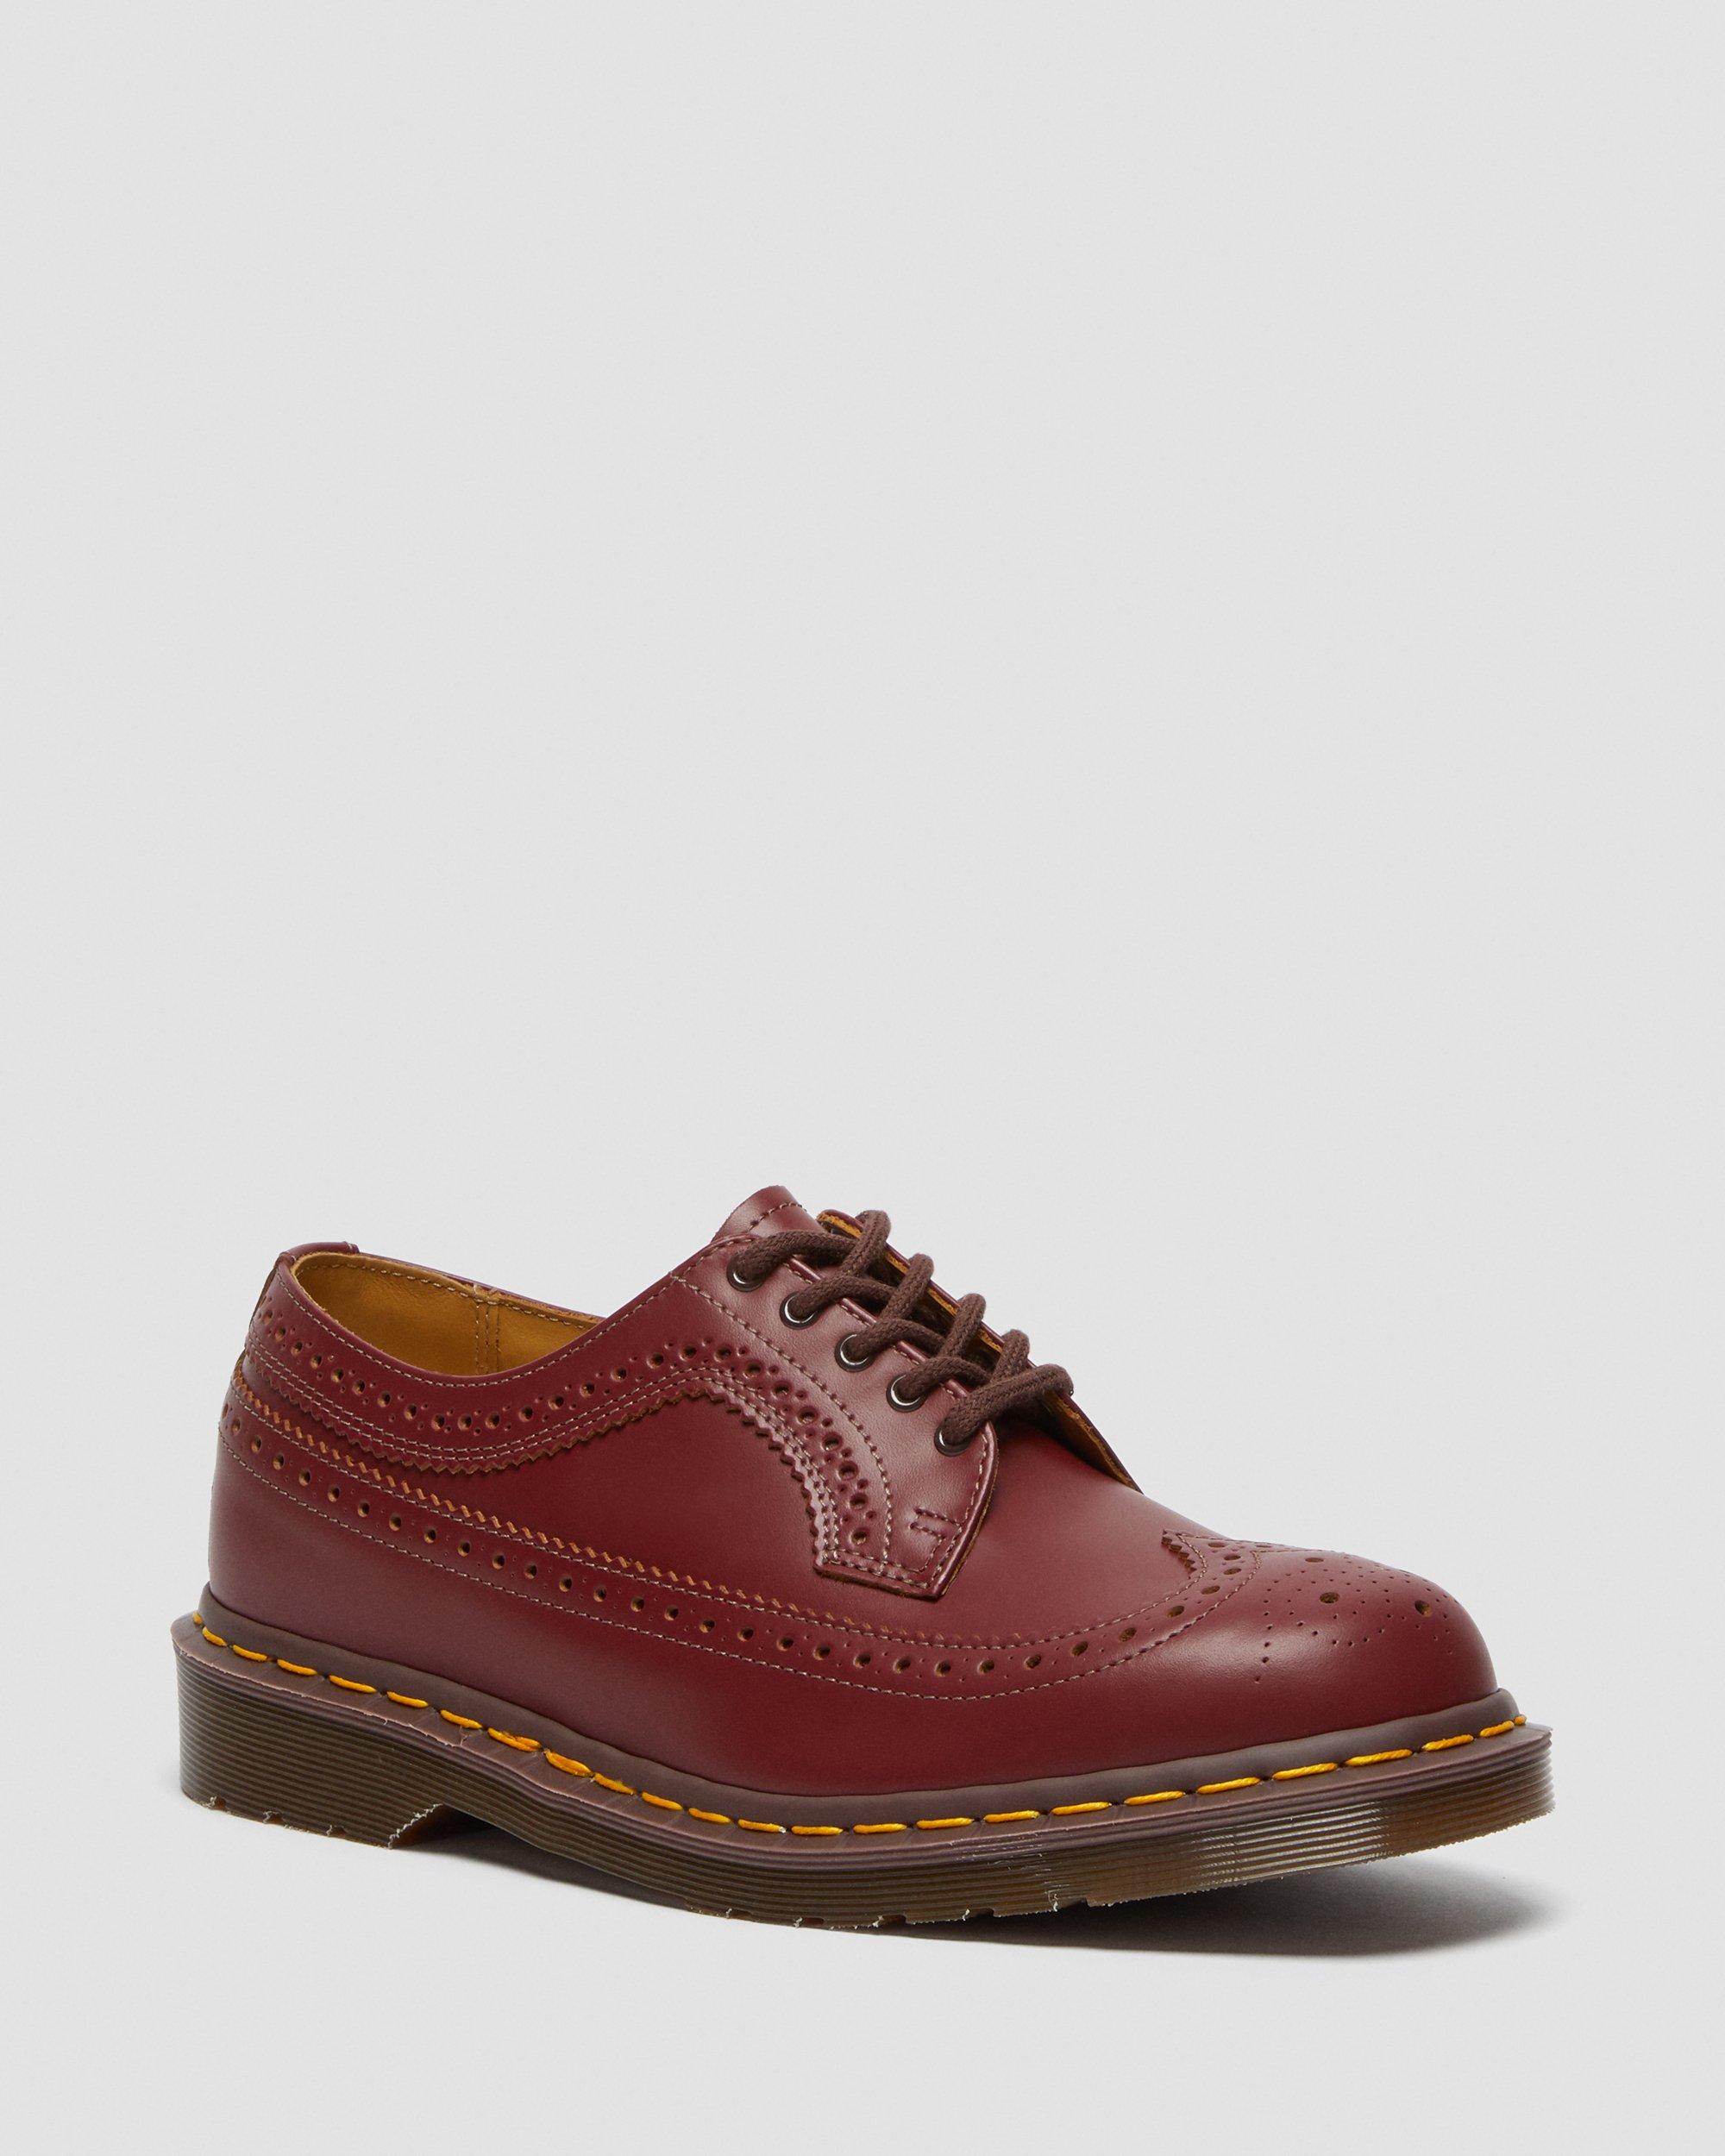 DR MARTENS 3989 Vintage Made In England Brogue Shoes